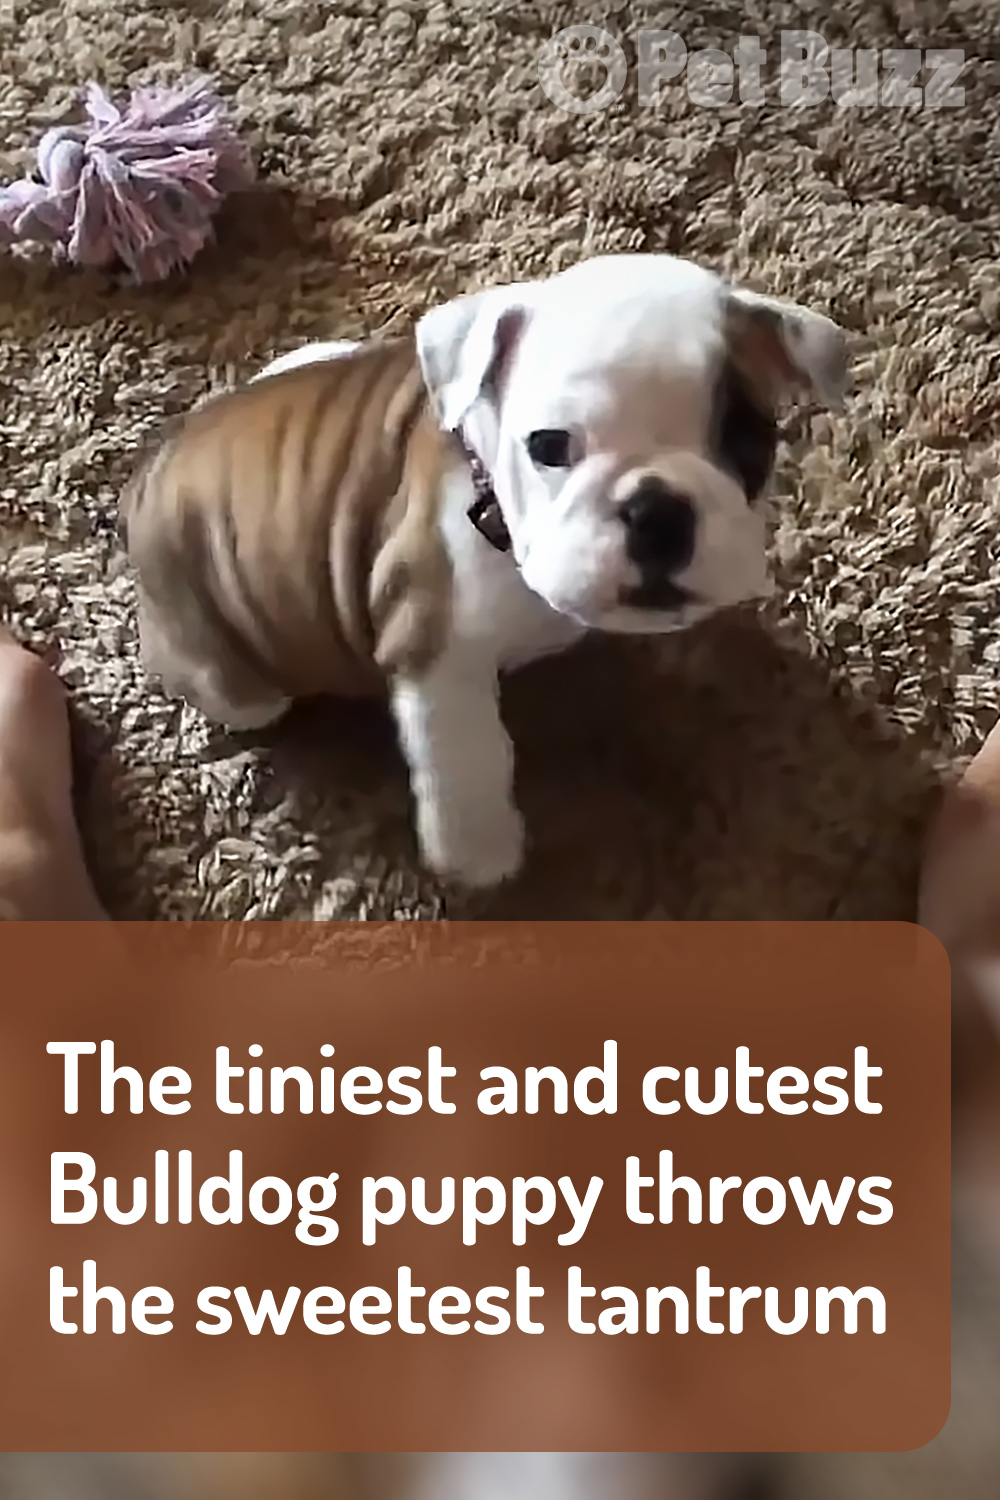 The tiniest and cutest Bulldog puppy throws the sweetest tantrum